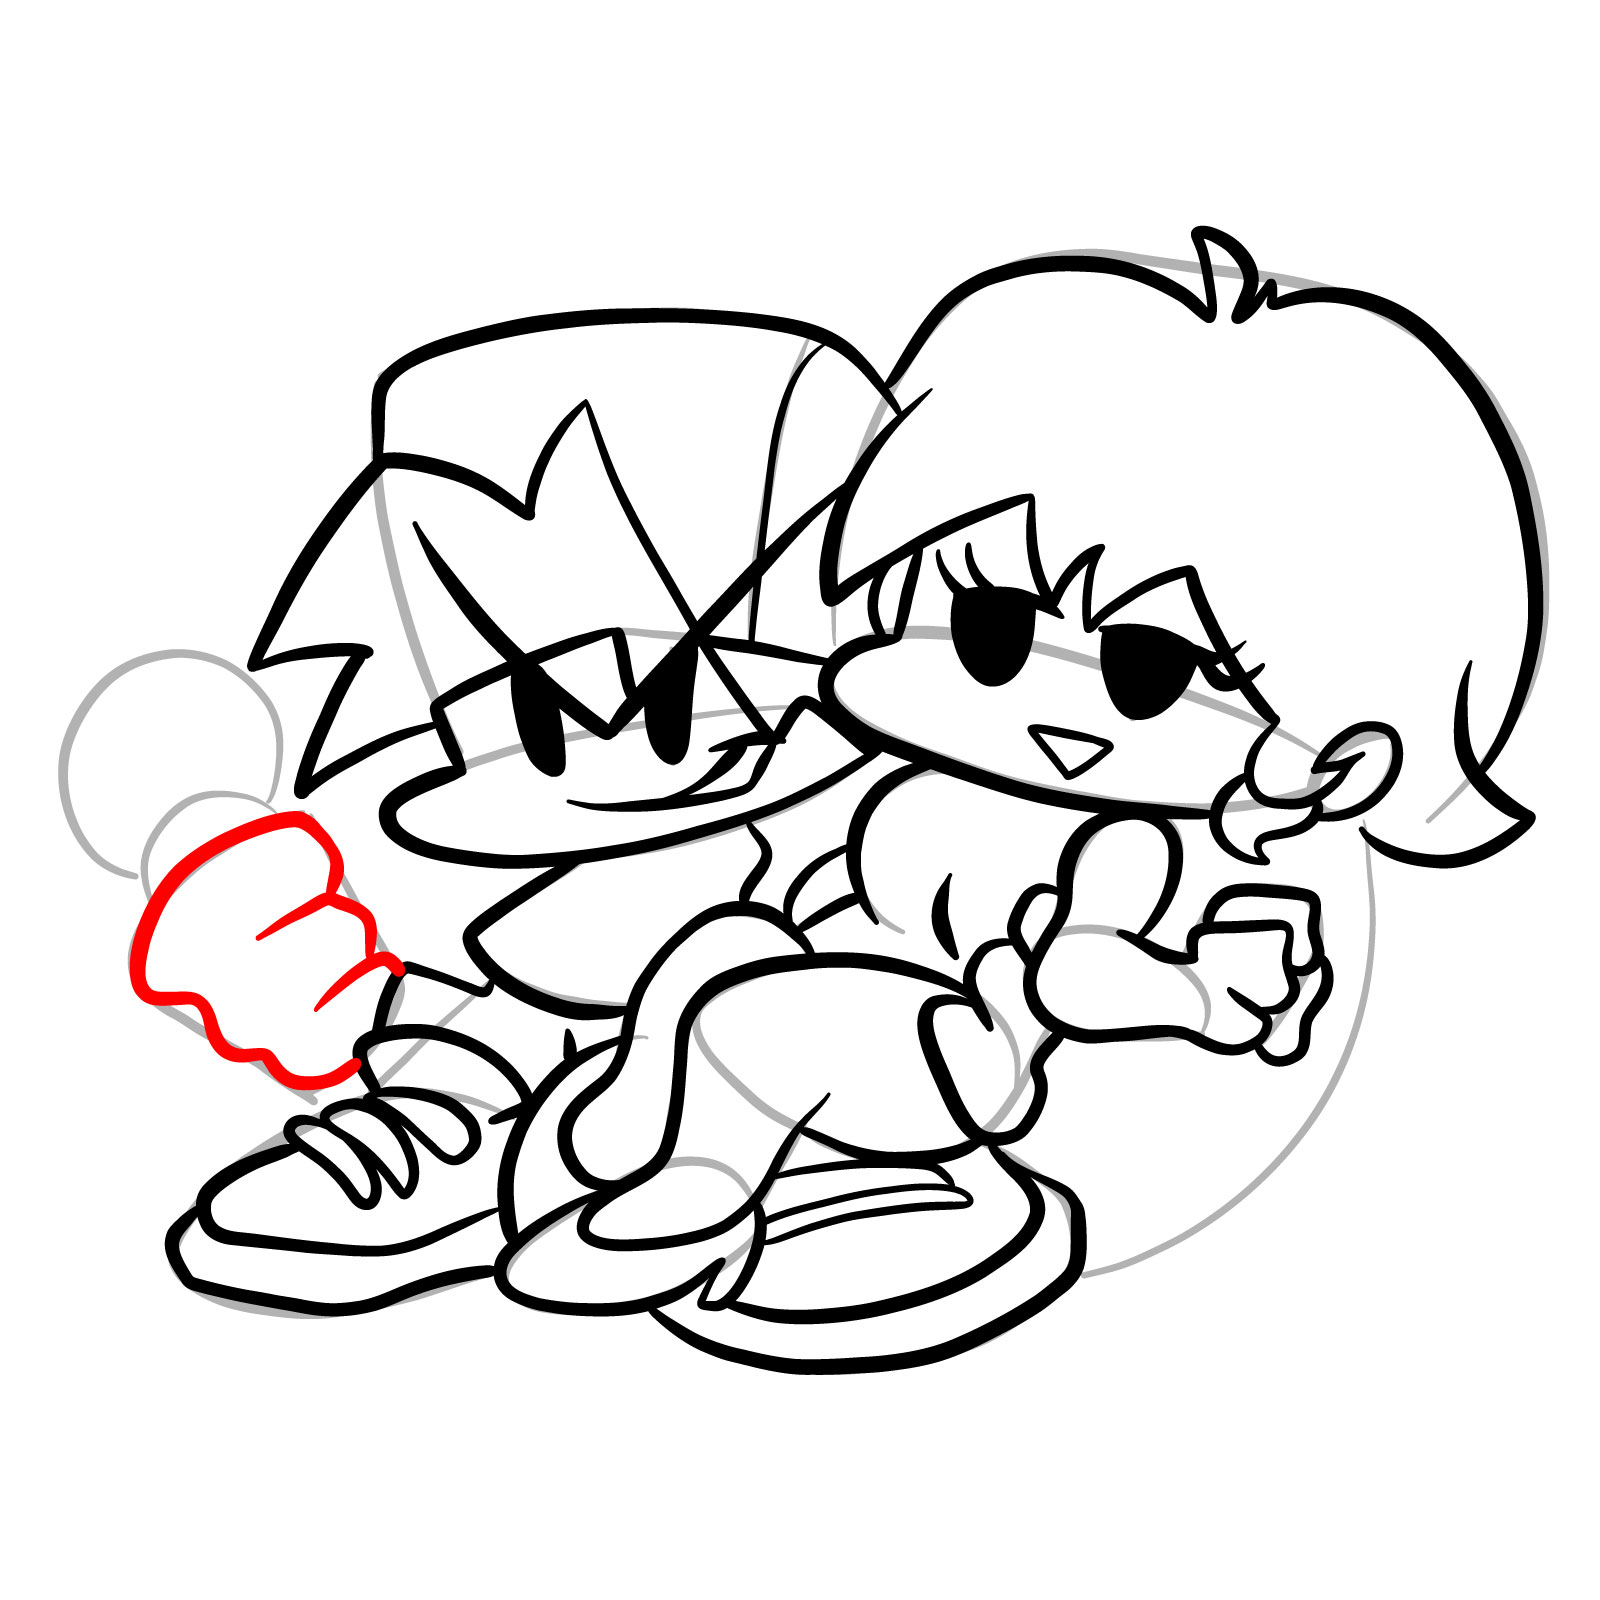 How to draw Bf holding Gf (week 7) - step 28